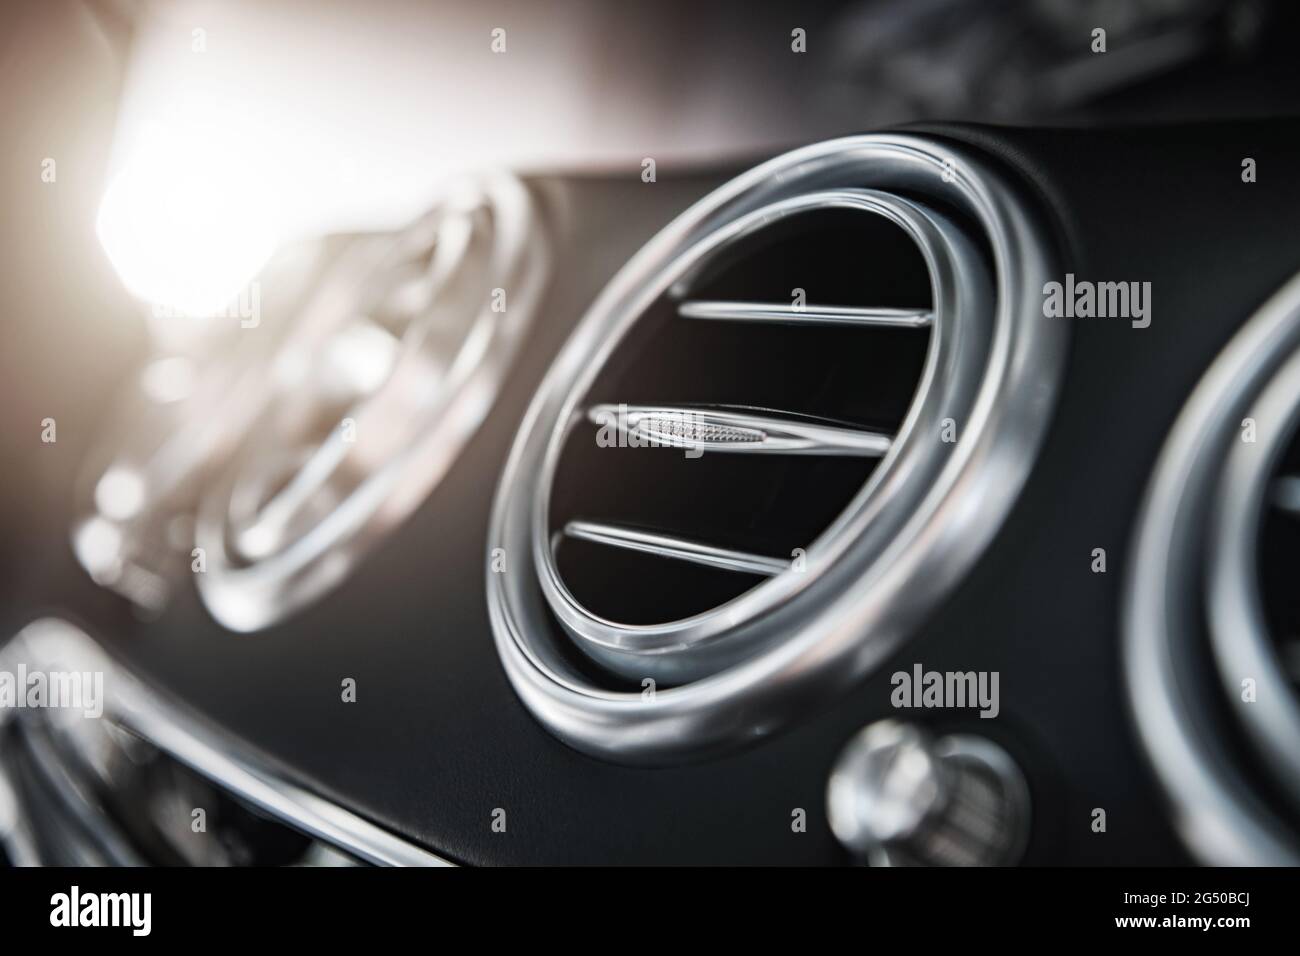 Modern Cars Interior Air Vents. Air Cleaning and Conditioning Inside Luxury Vehicle. Stock Photo